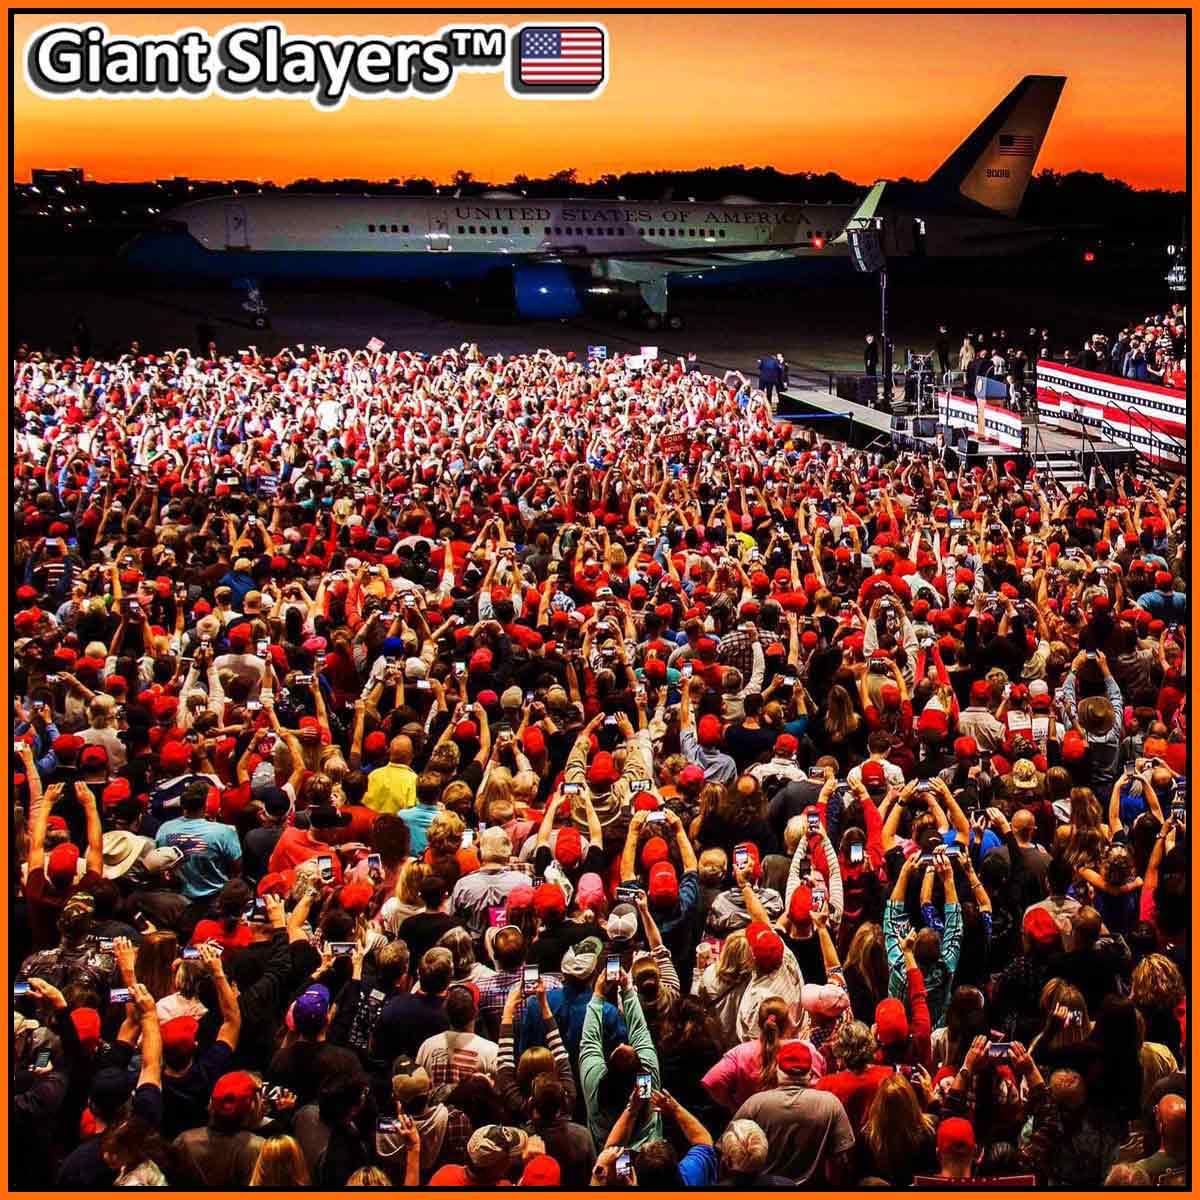 Giant-Slayers-America-First